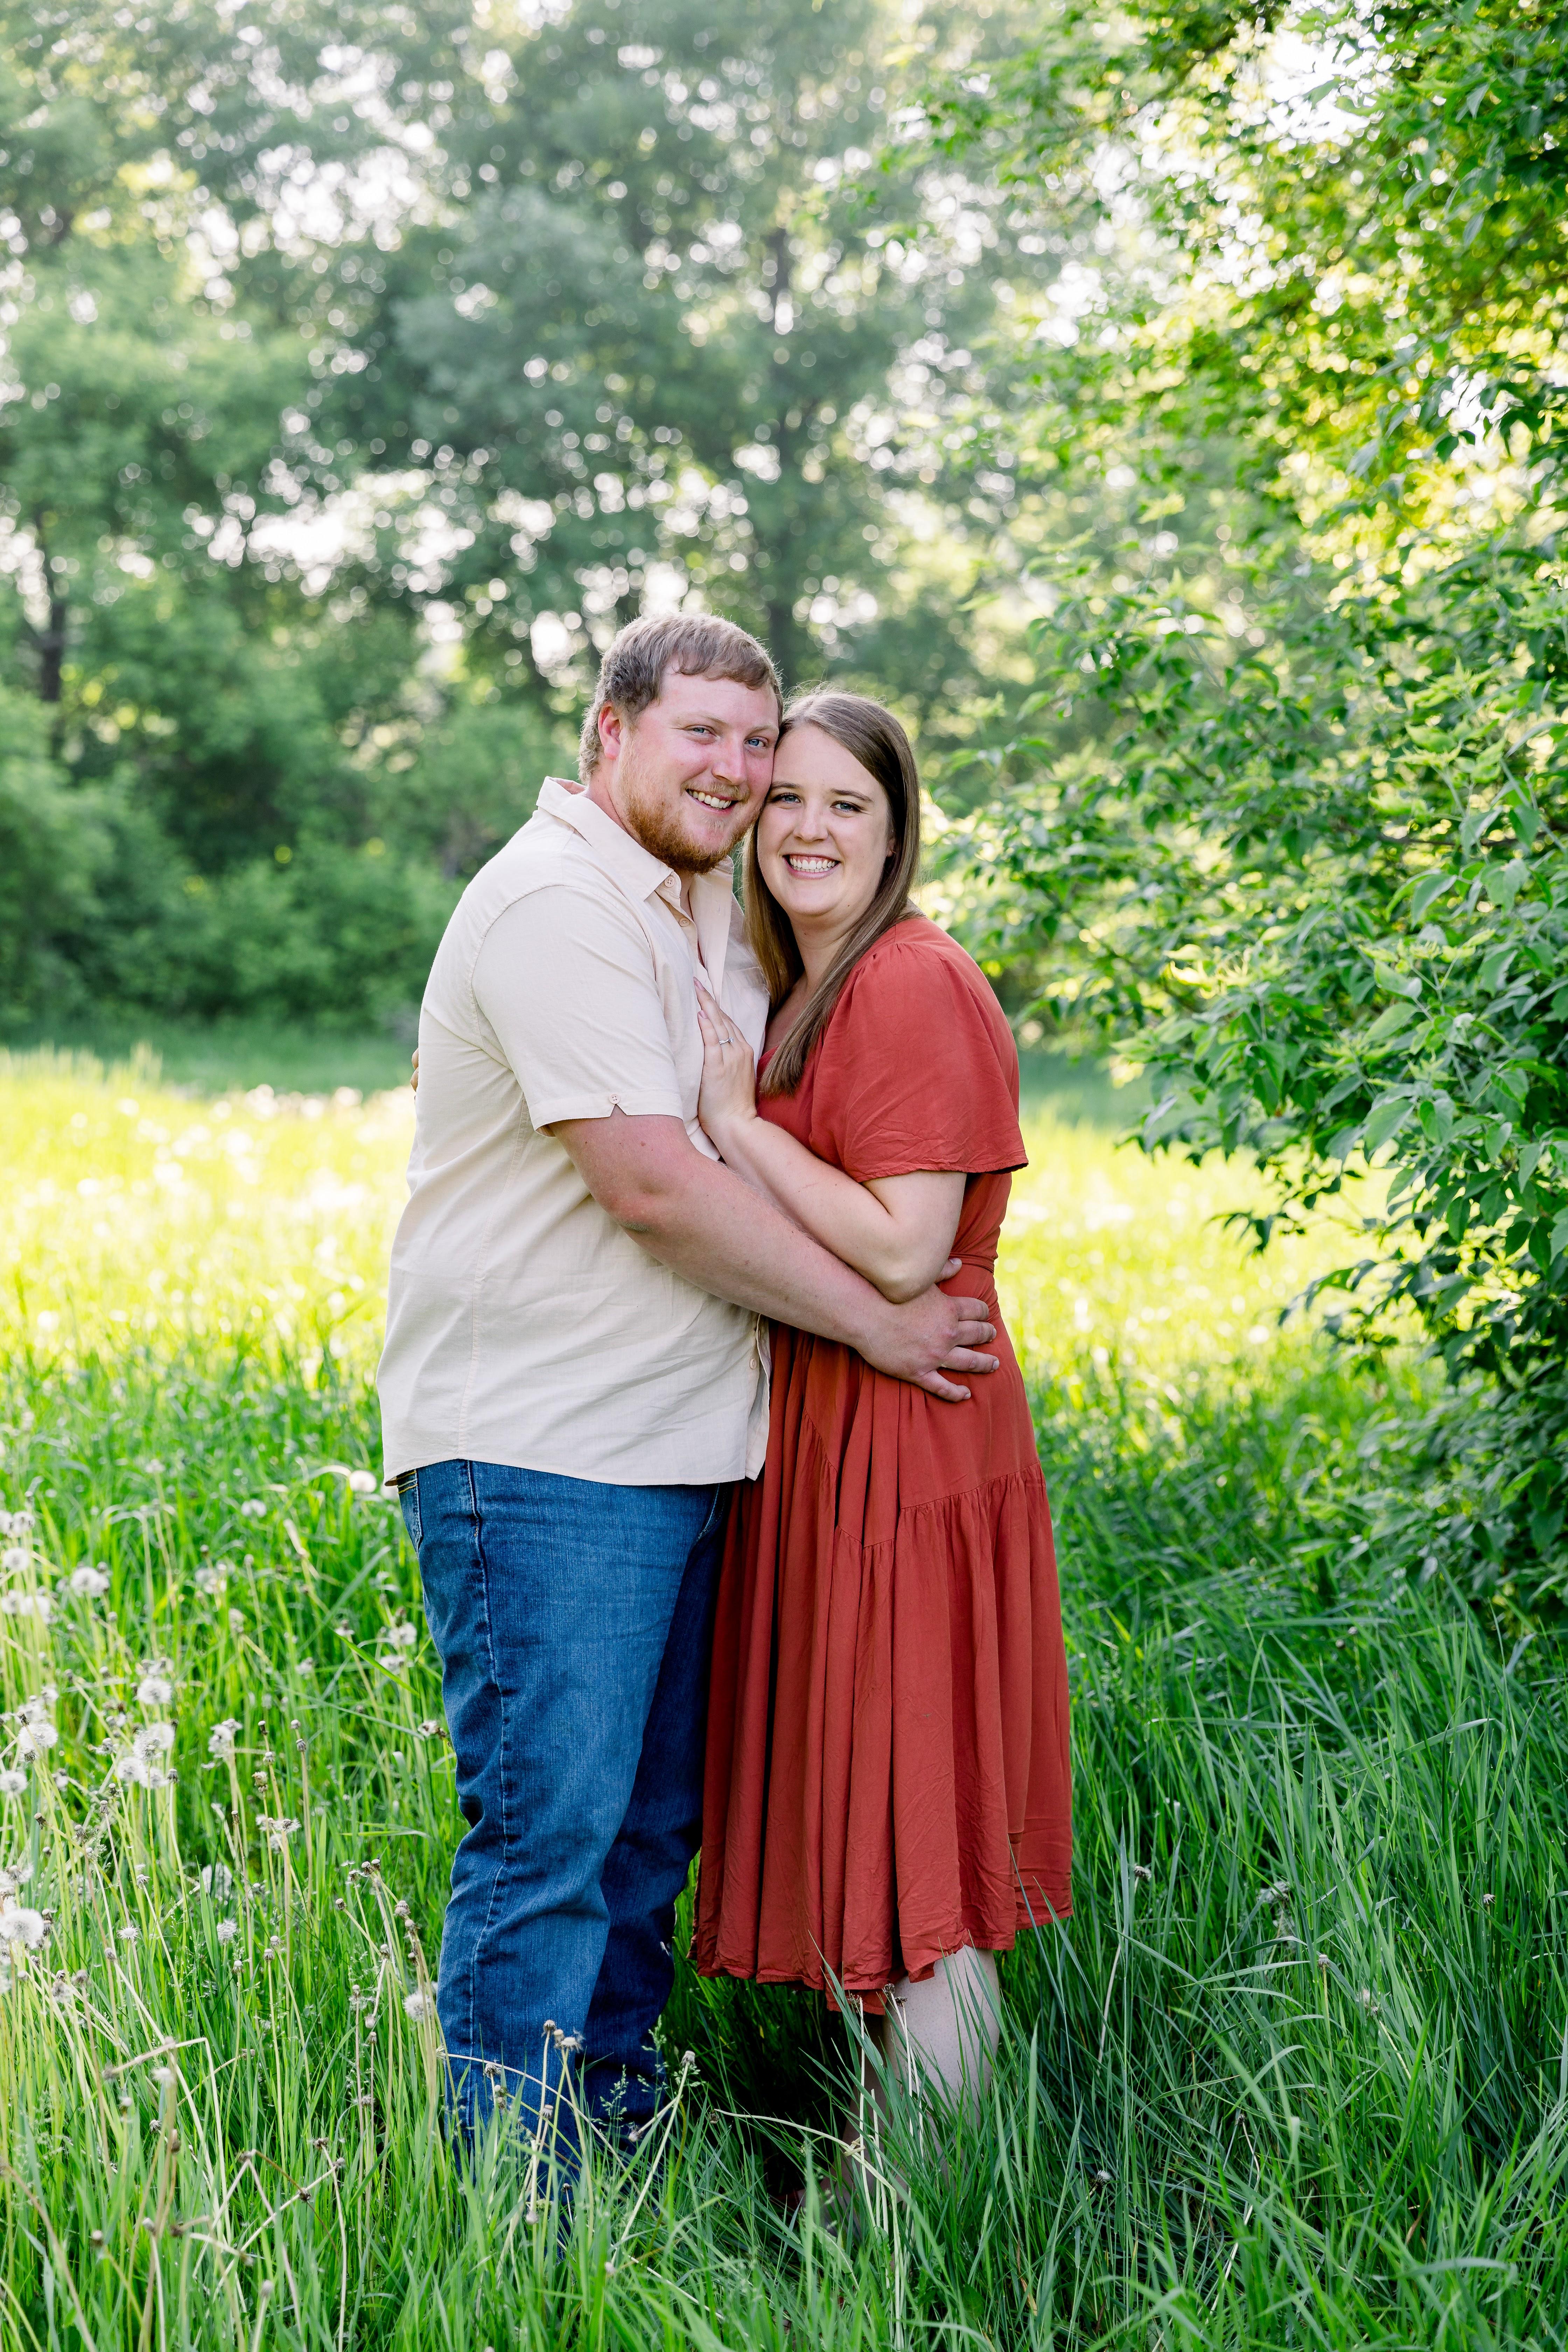 The Wedding Website of Brianna Geigle and Nick Dalchow